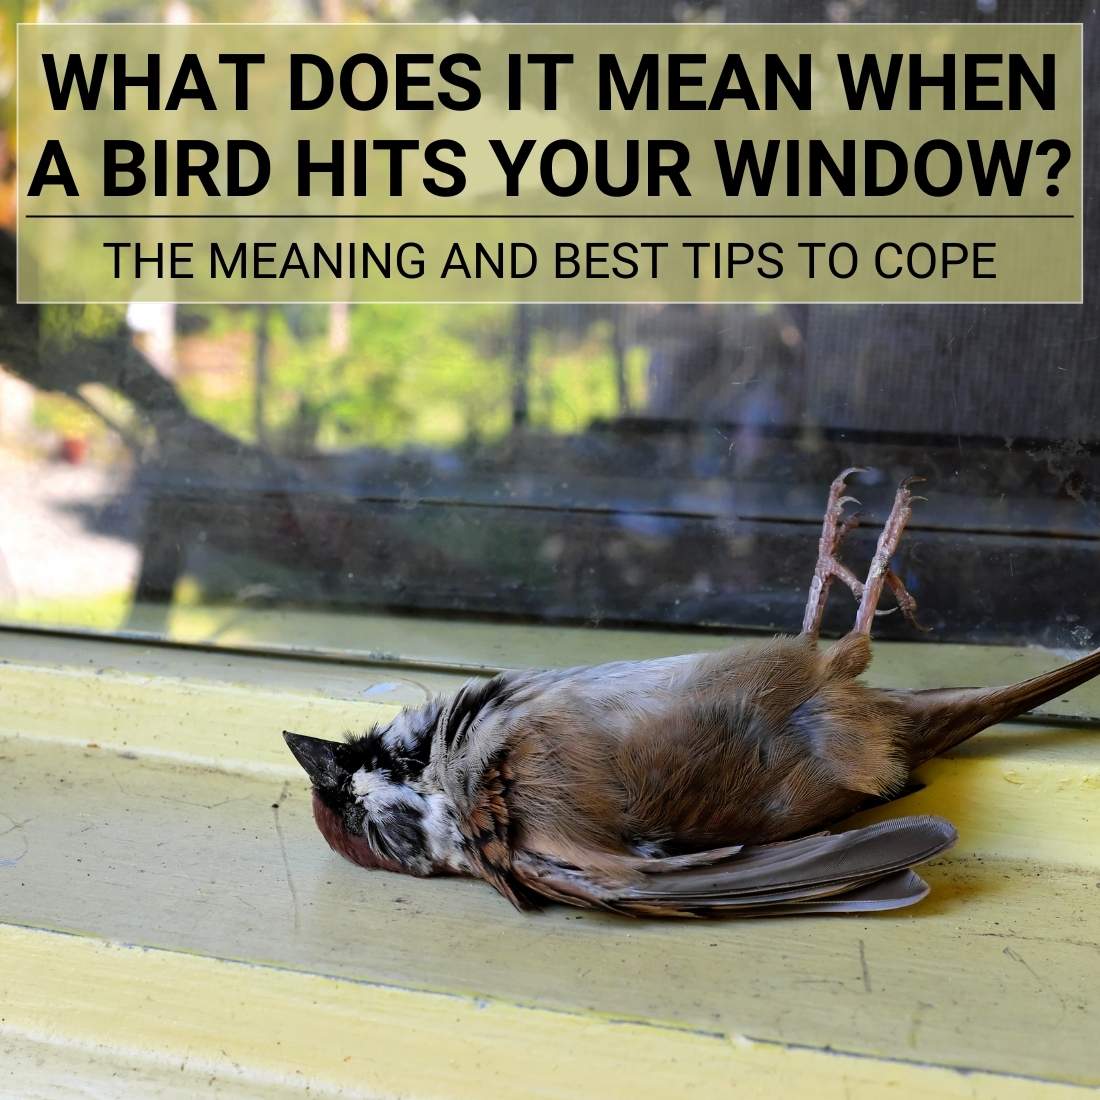 What Does It Mean When A Bird Hits Your Window